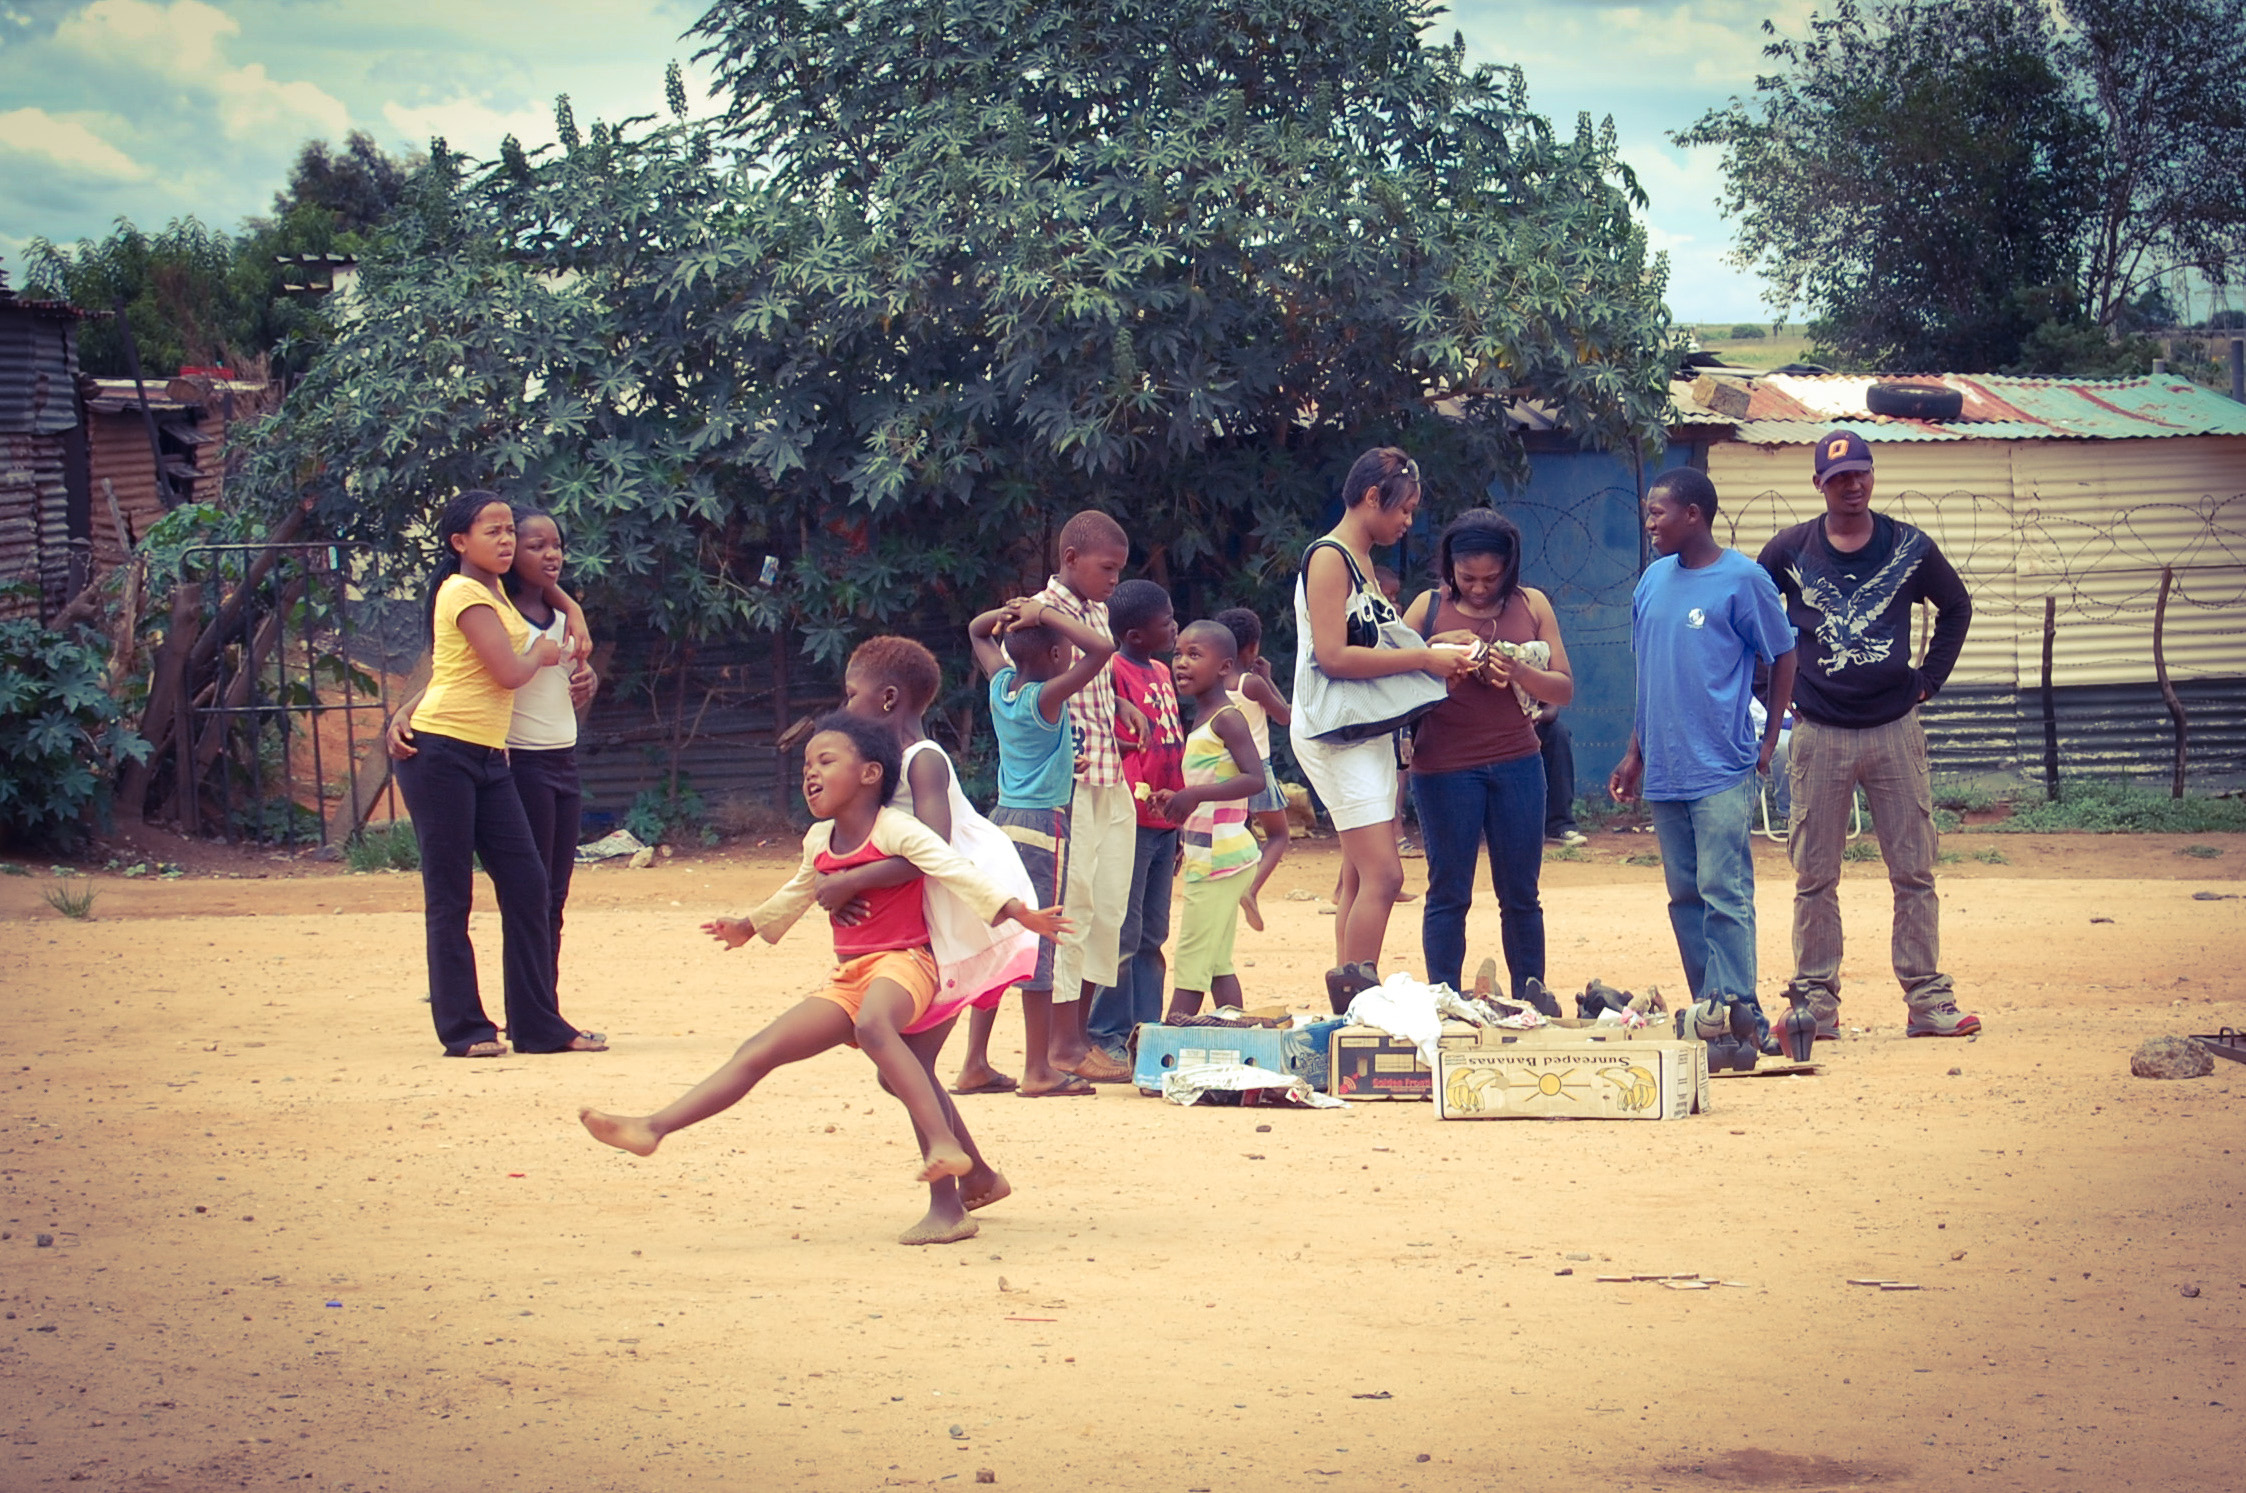 In Khayelitsha, children play while tourists look through their homemade gifts.